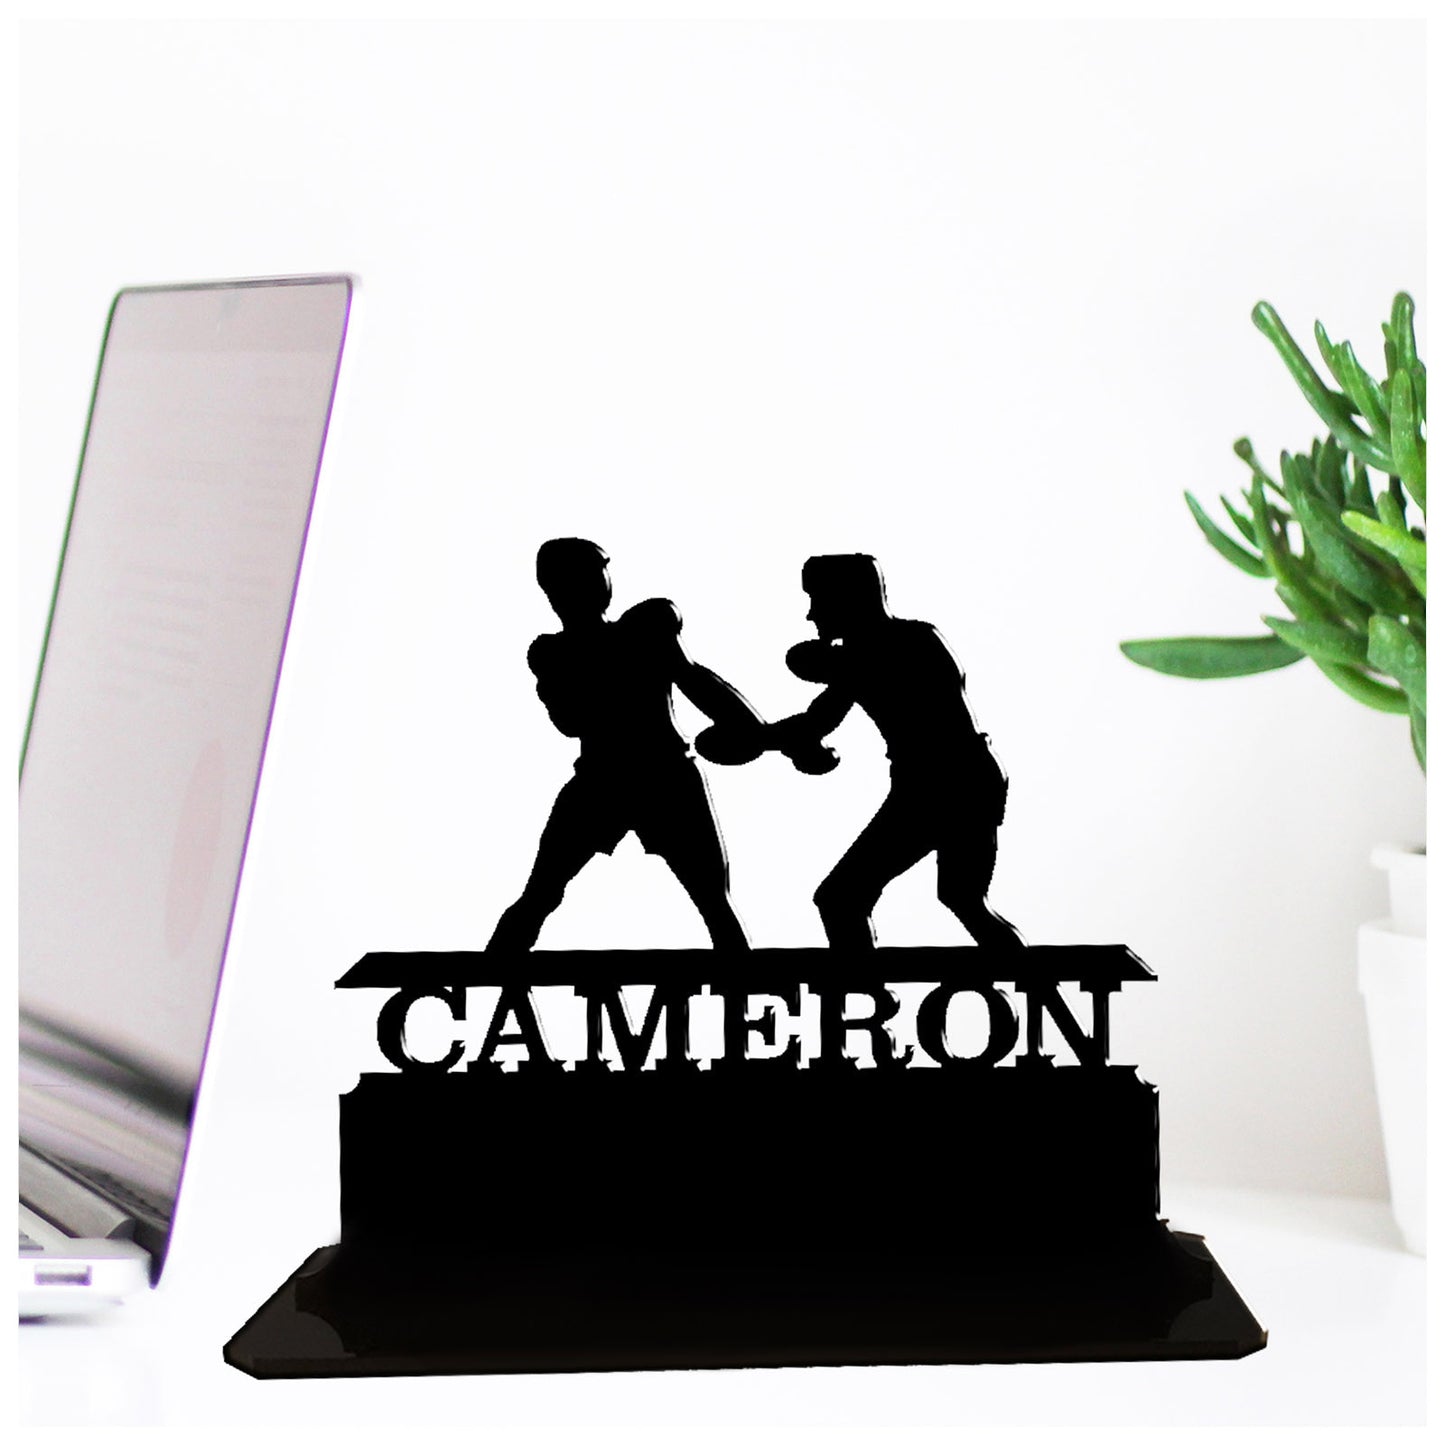 Personalised acrylic gift for boxers. This standalone present is a keepsake ornamental plaque.